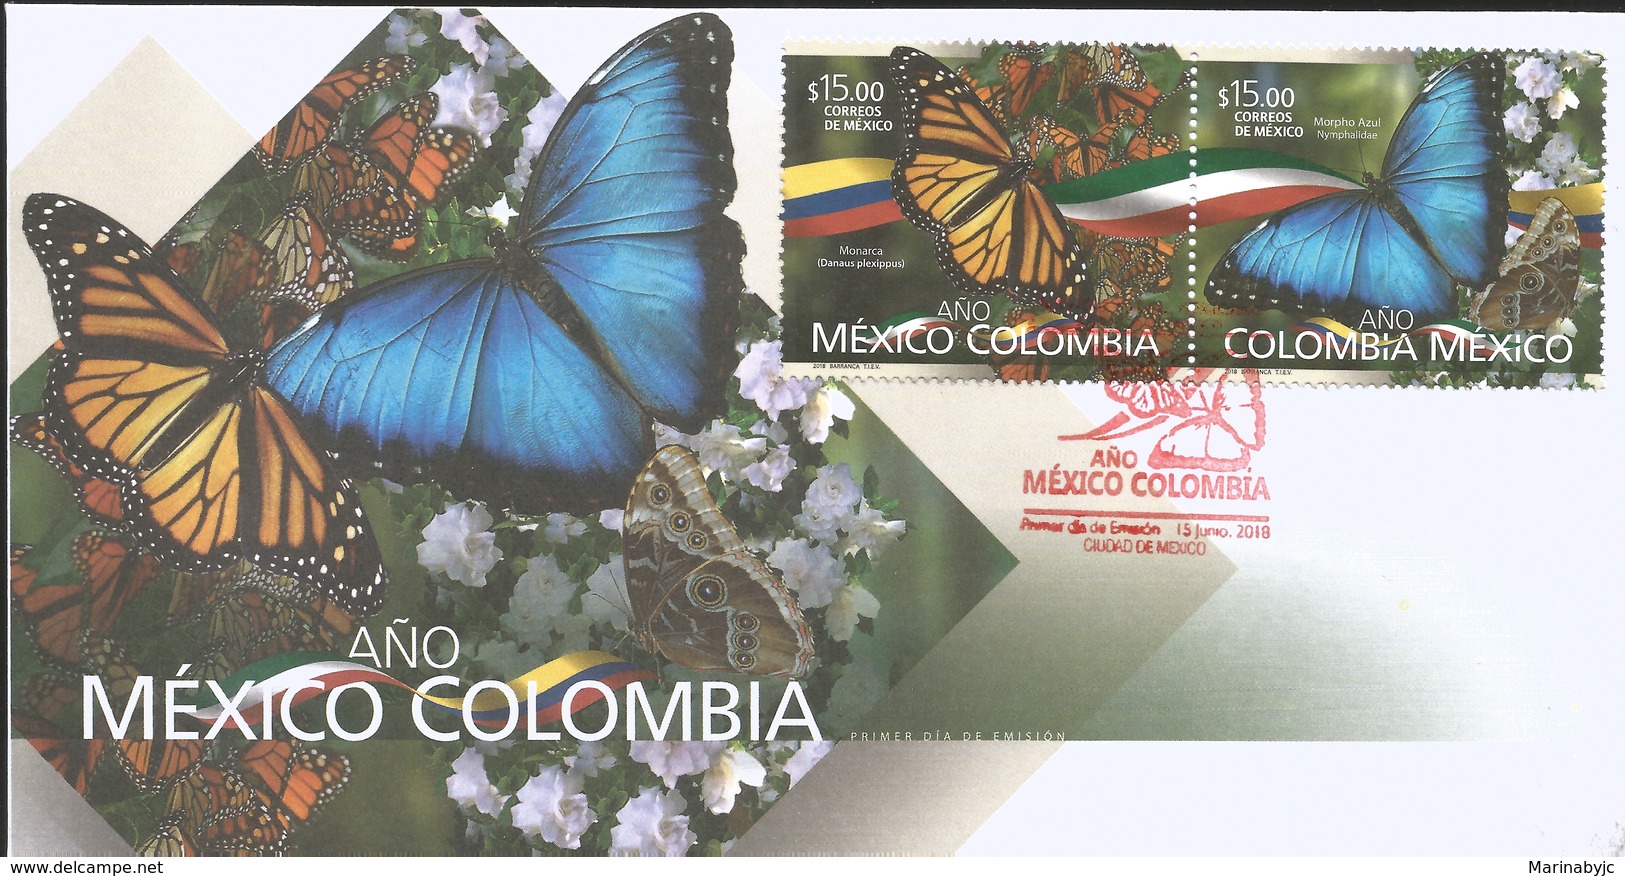 M) 2018, MEXICO, COLOMBIA - MEXICO YEAR, MONARCH BUTTERFLY, AND BLUE BUTTERFLY, FDC - Mexico